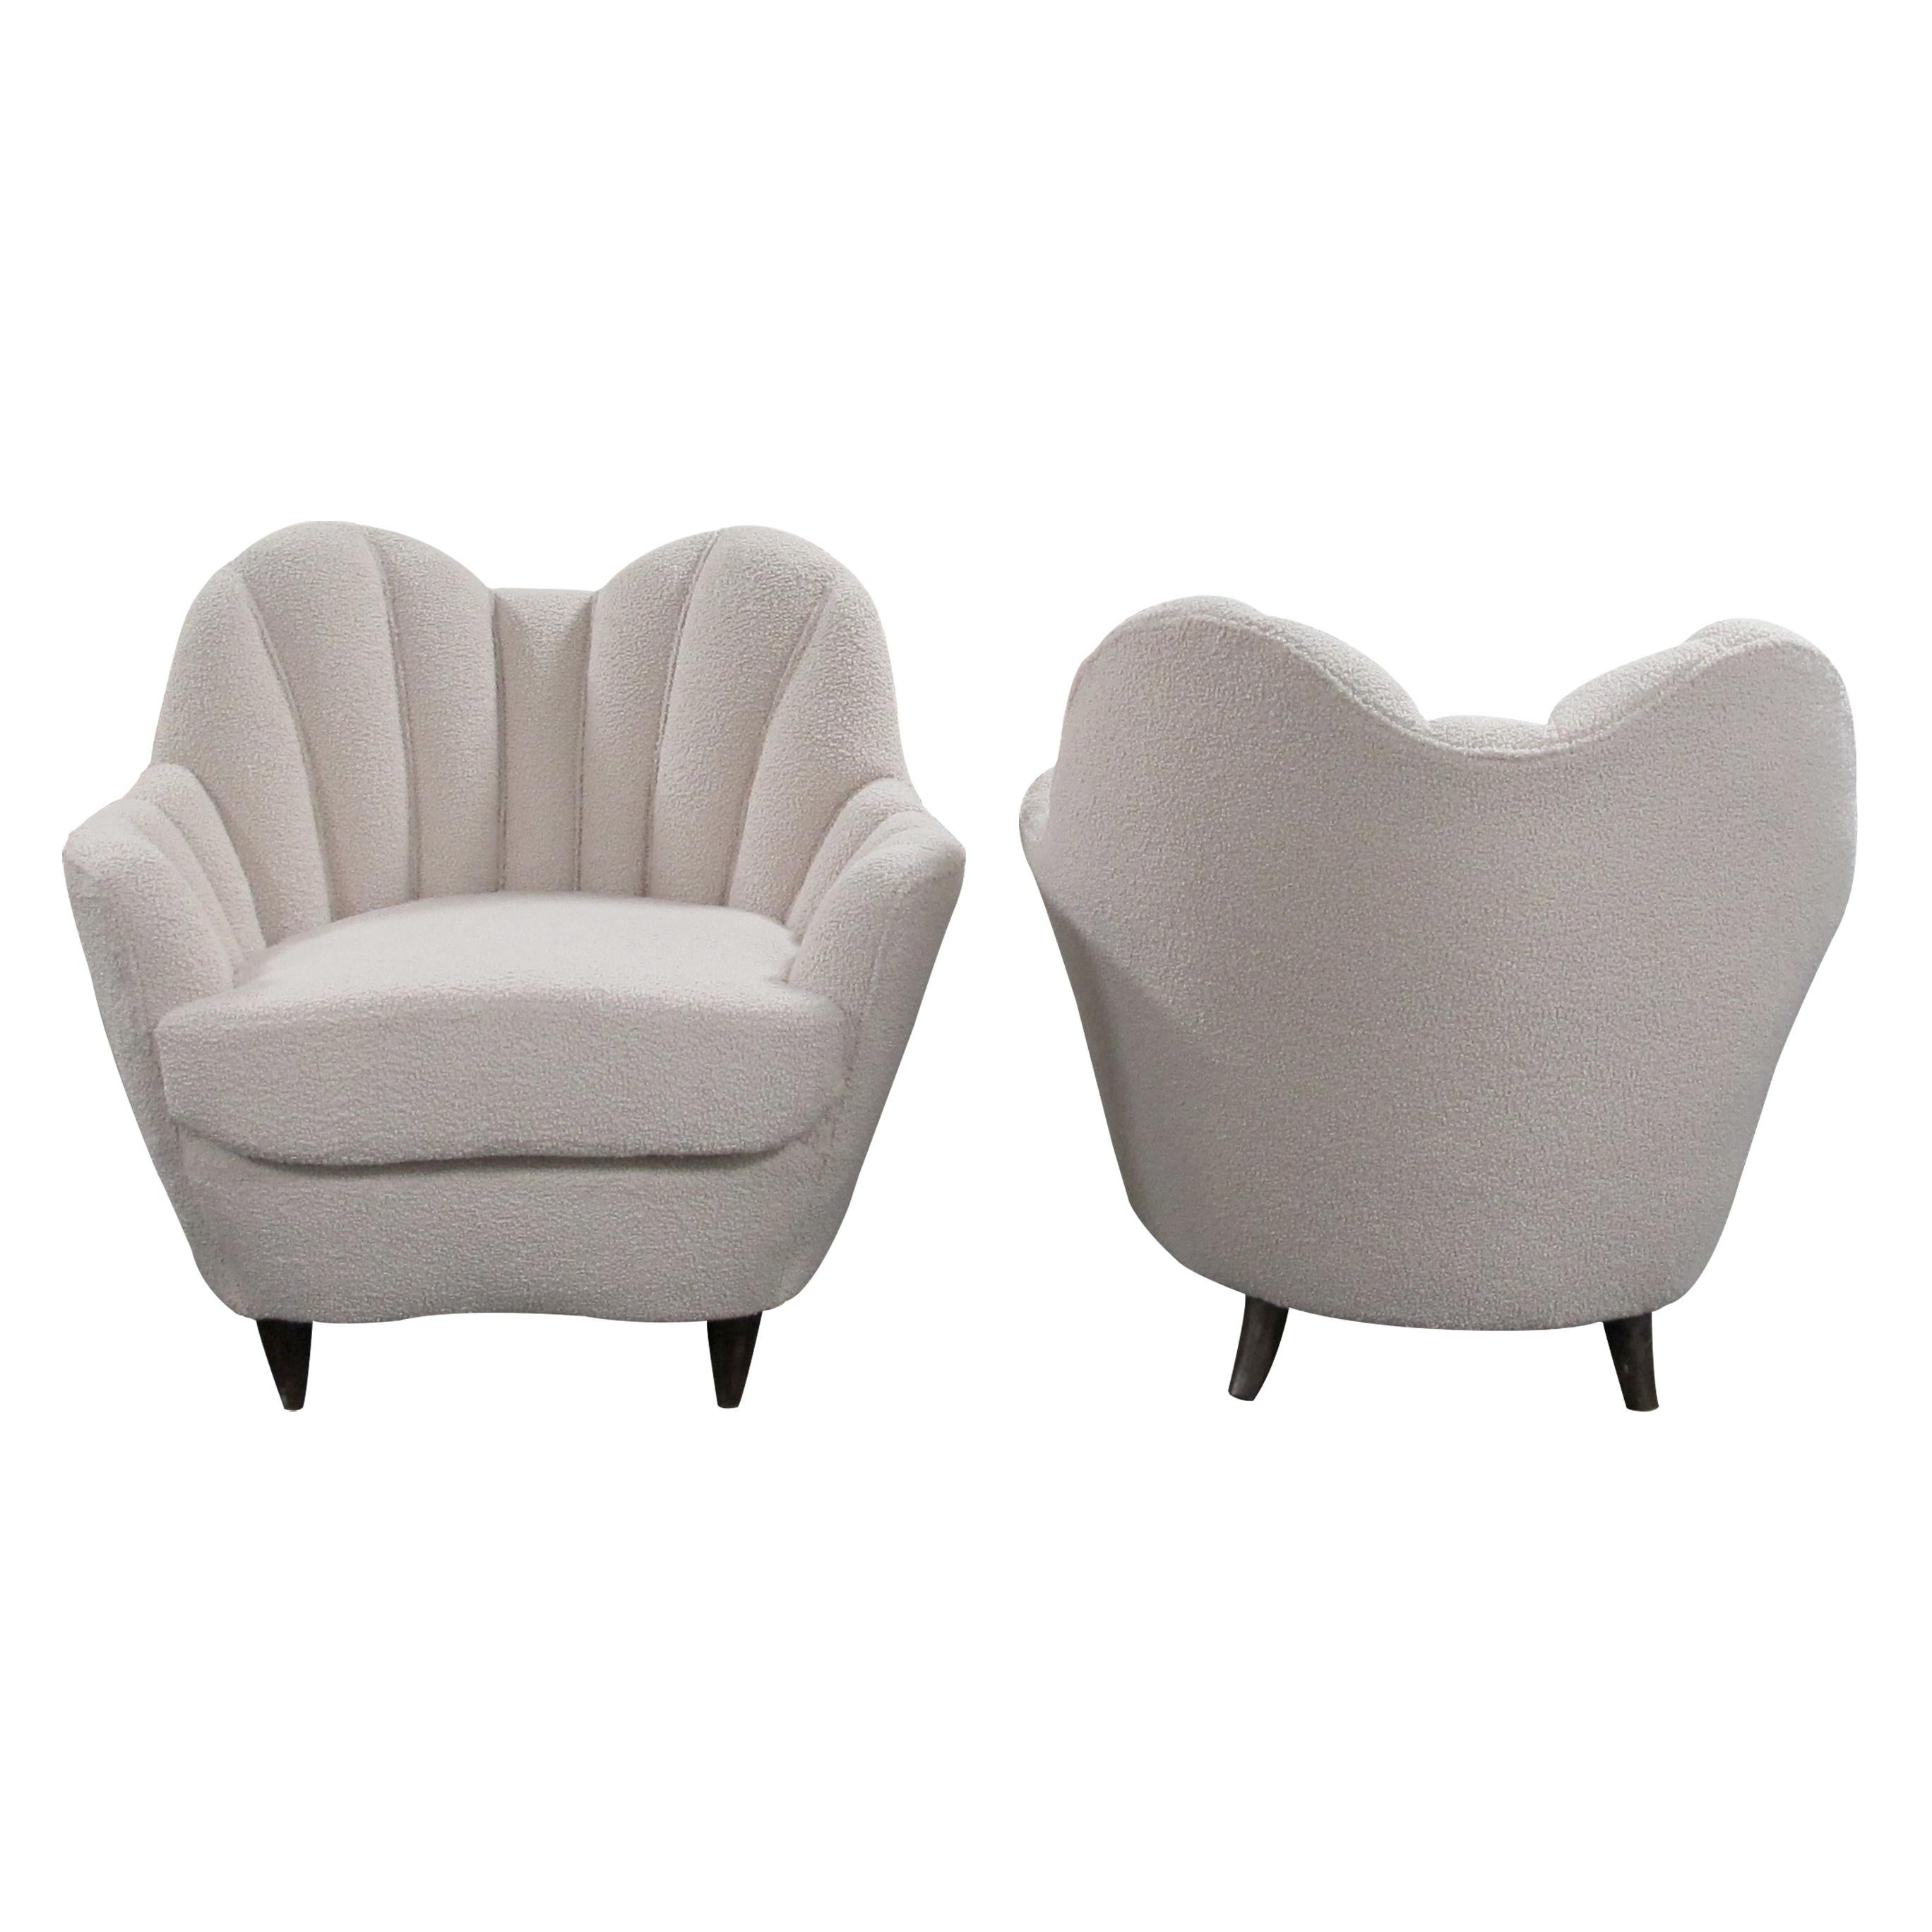 A pair of 1940s scallop shaped armchairs which are in the style of the Italian designer Gio Ponti. These elegant, and very comfortable, Art Deco armchairs boast really beautiful and accentuated curves. Newly reupholstered in a cream-colored Bouclé